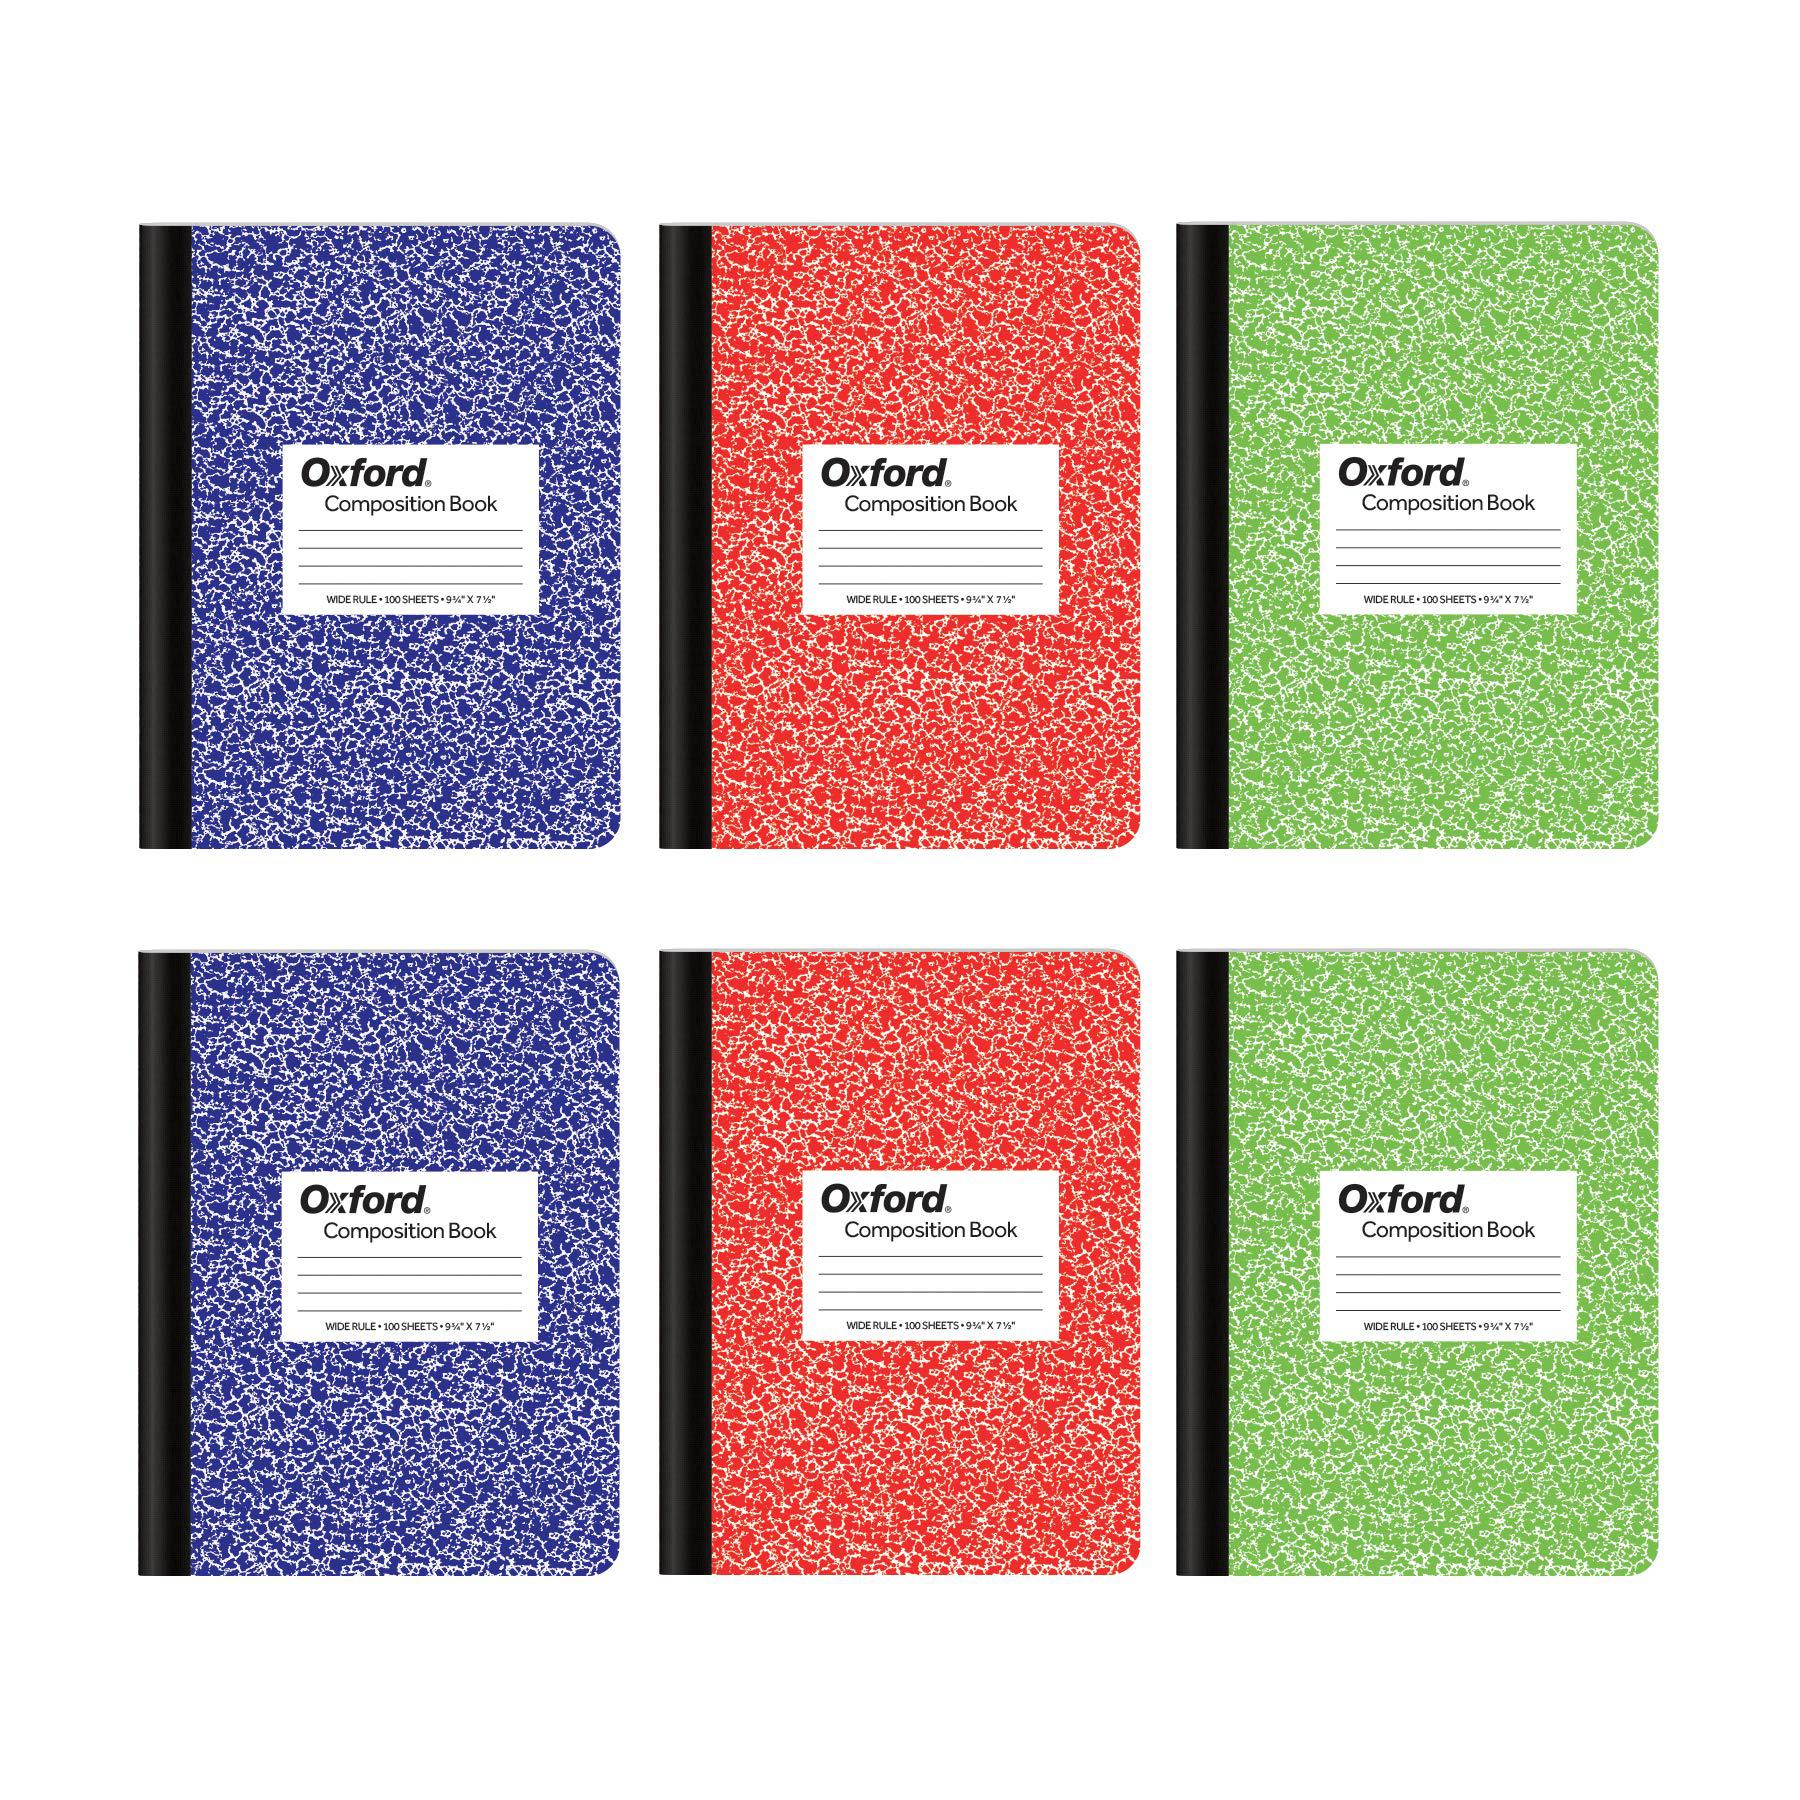 oxford composition notebook 6 pack, wide ruled paper, 9-3/4 x 7-1/2 inches, 100 sheets, assorted marble covers, 2 each: blue,